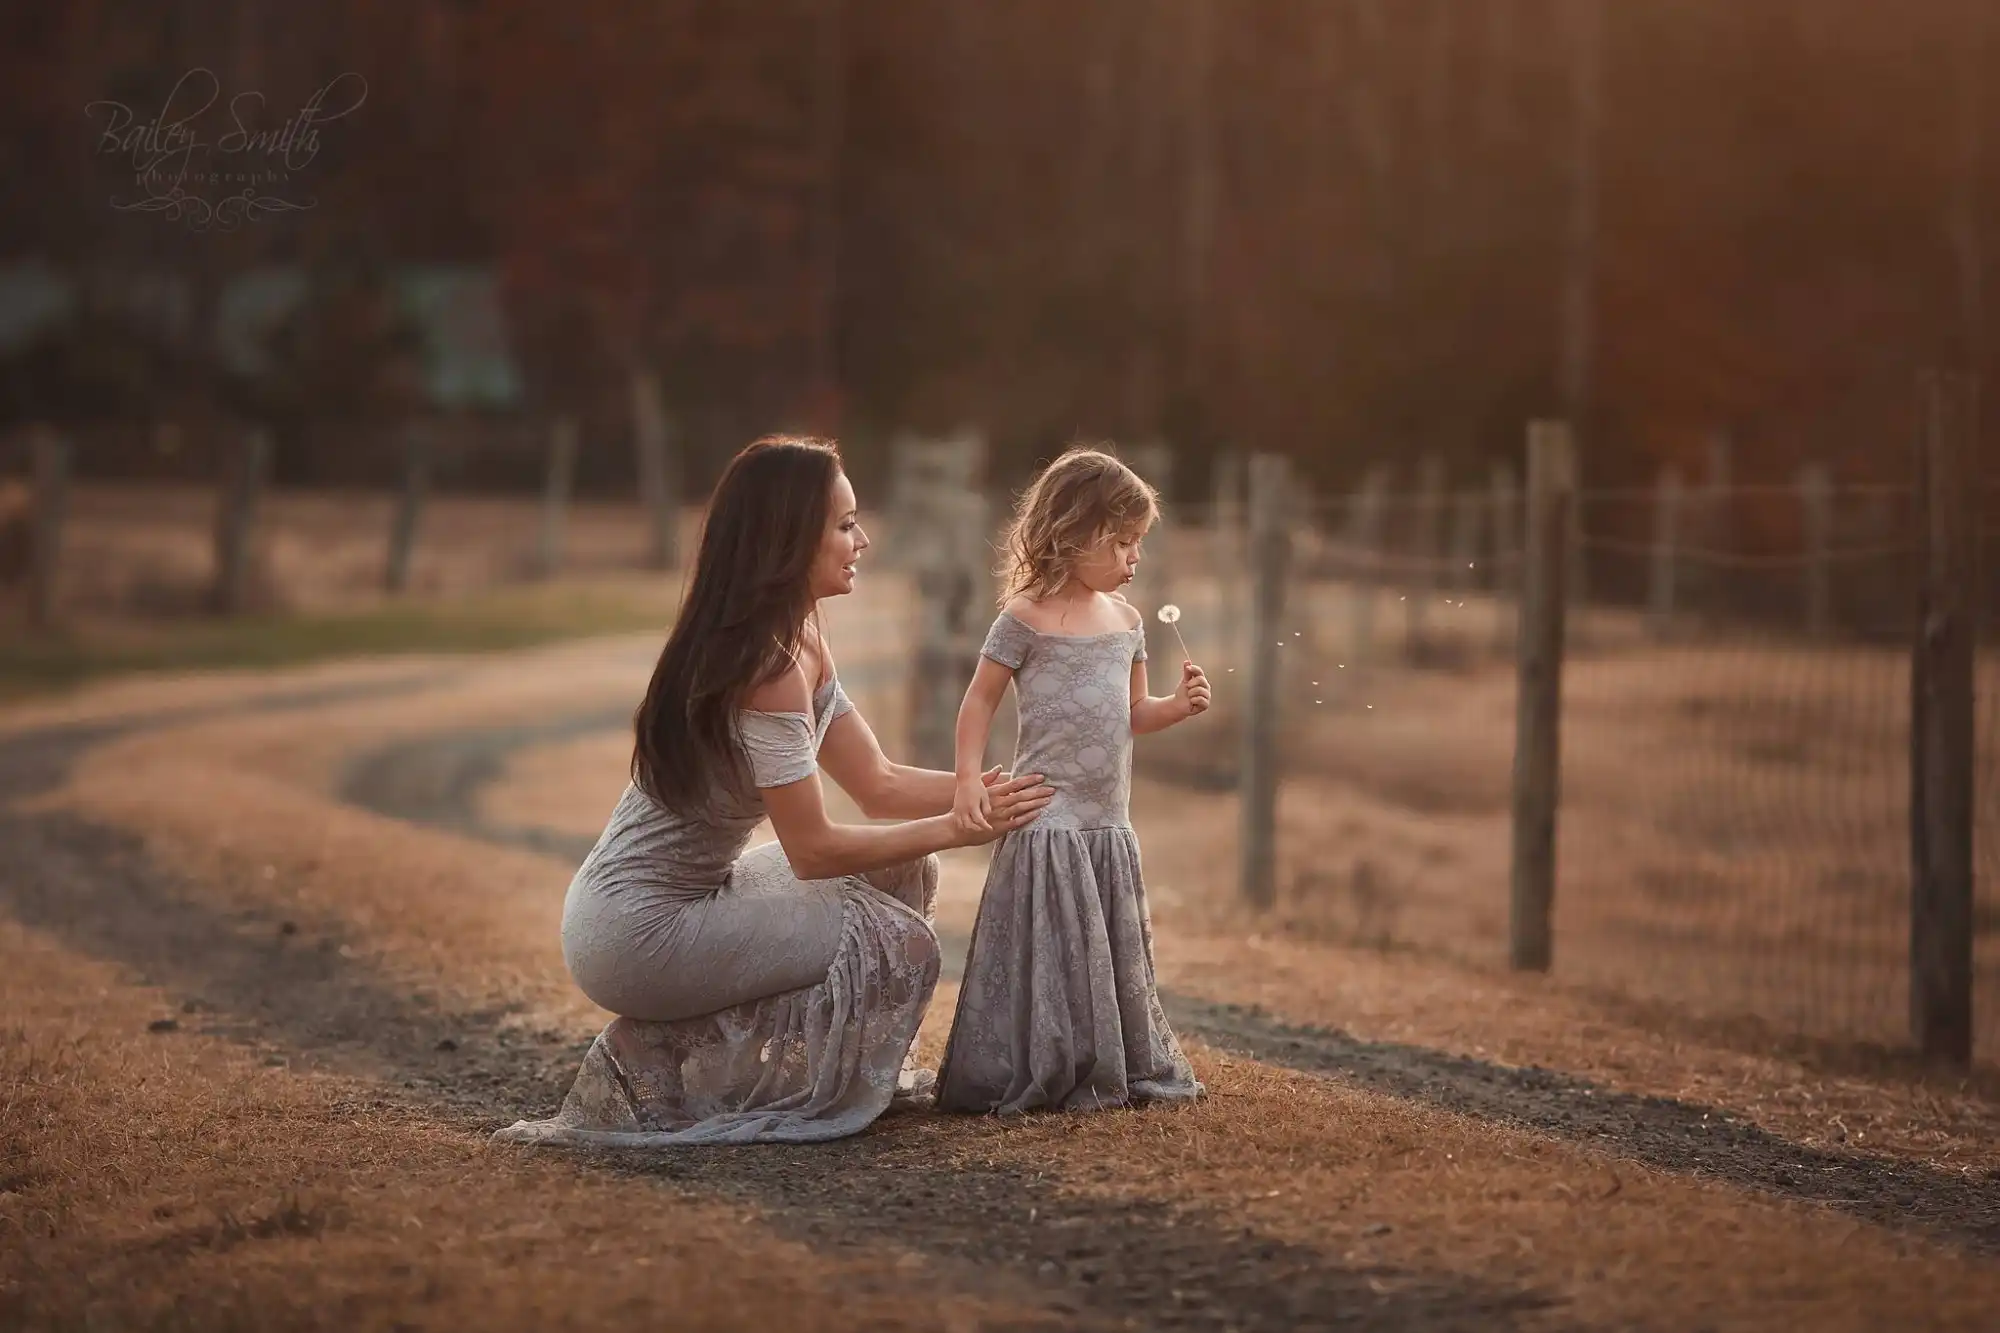 Creative Mother Daughter Photoshoot Ideas. Top Poses & Tips! - what moms  love